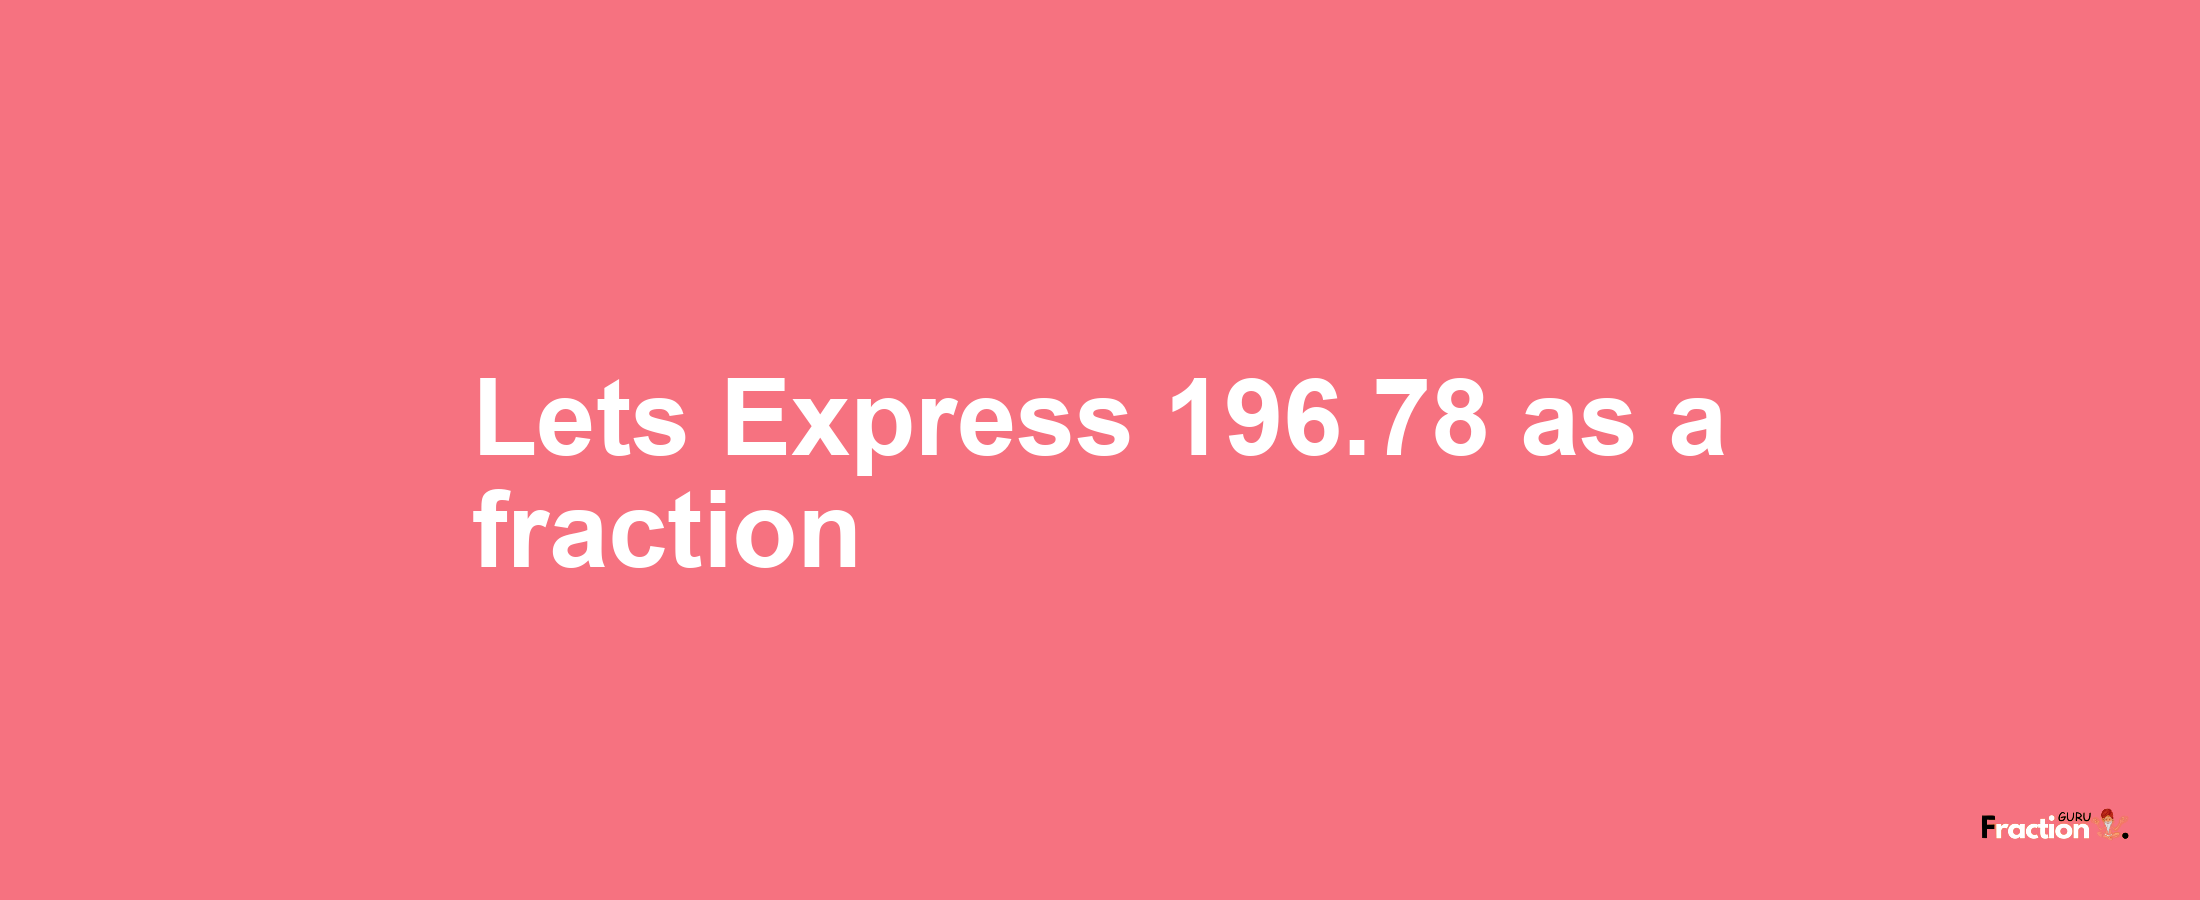 Lets Express 196.78 as afraction